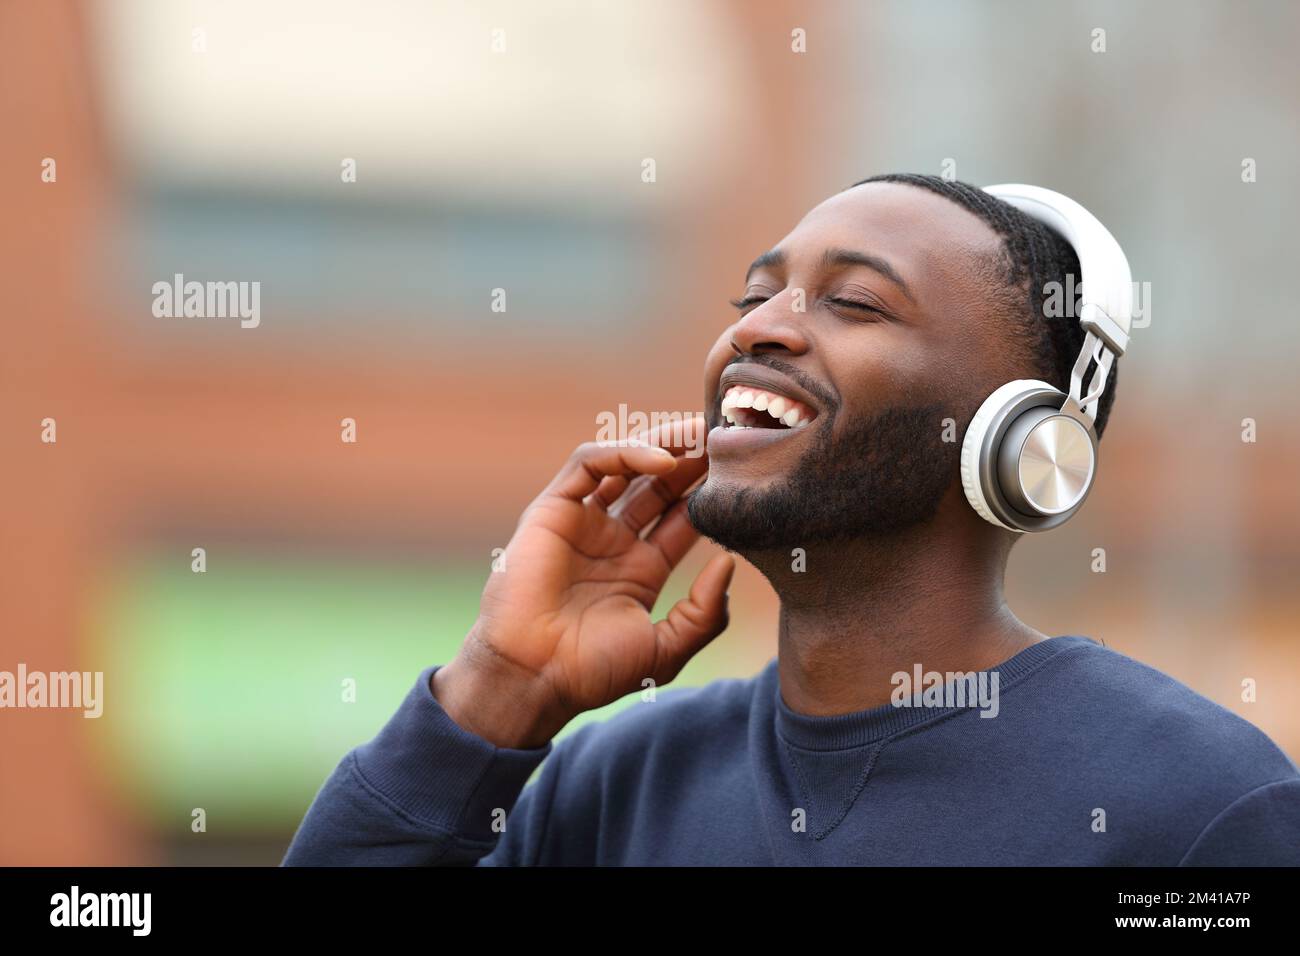 Happy black man wearing wireless headphones listening to music laughing in the street Stock Photo